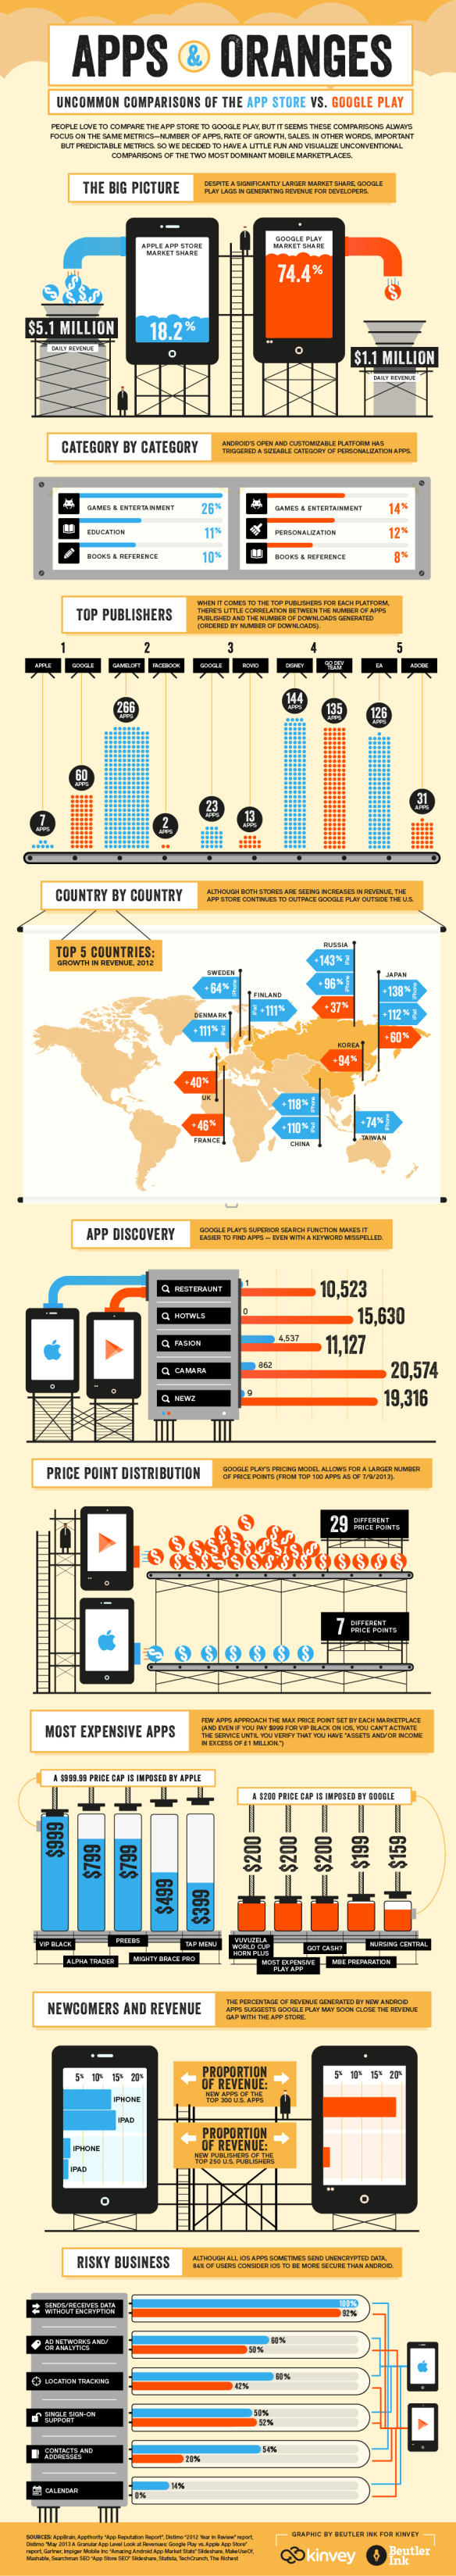 kinvey_apps_and_oranges_infographic